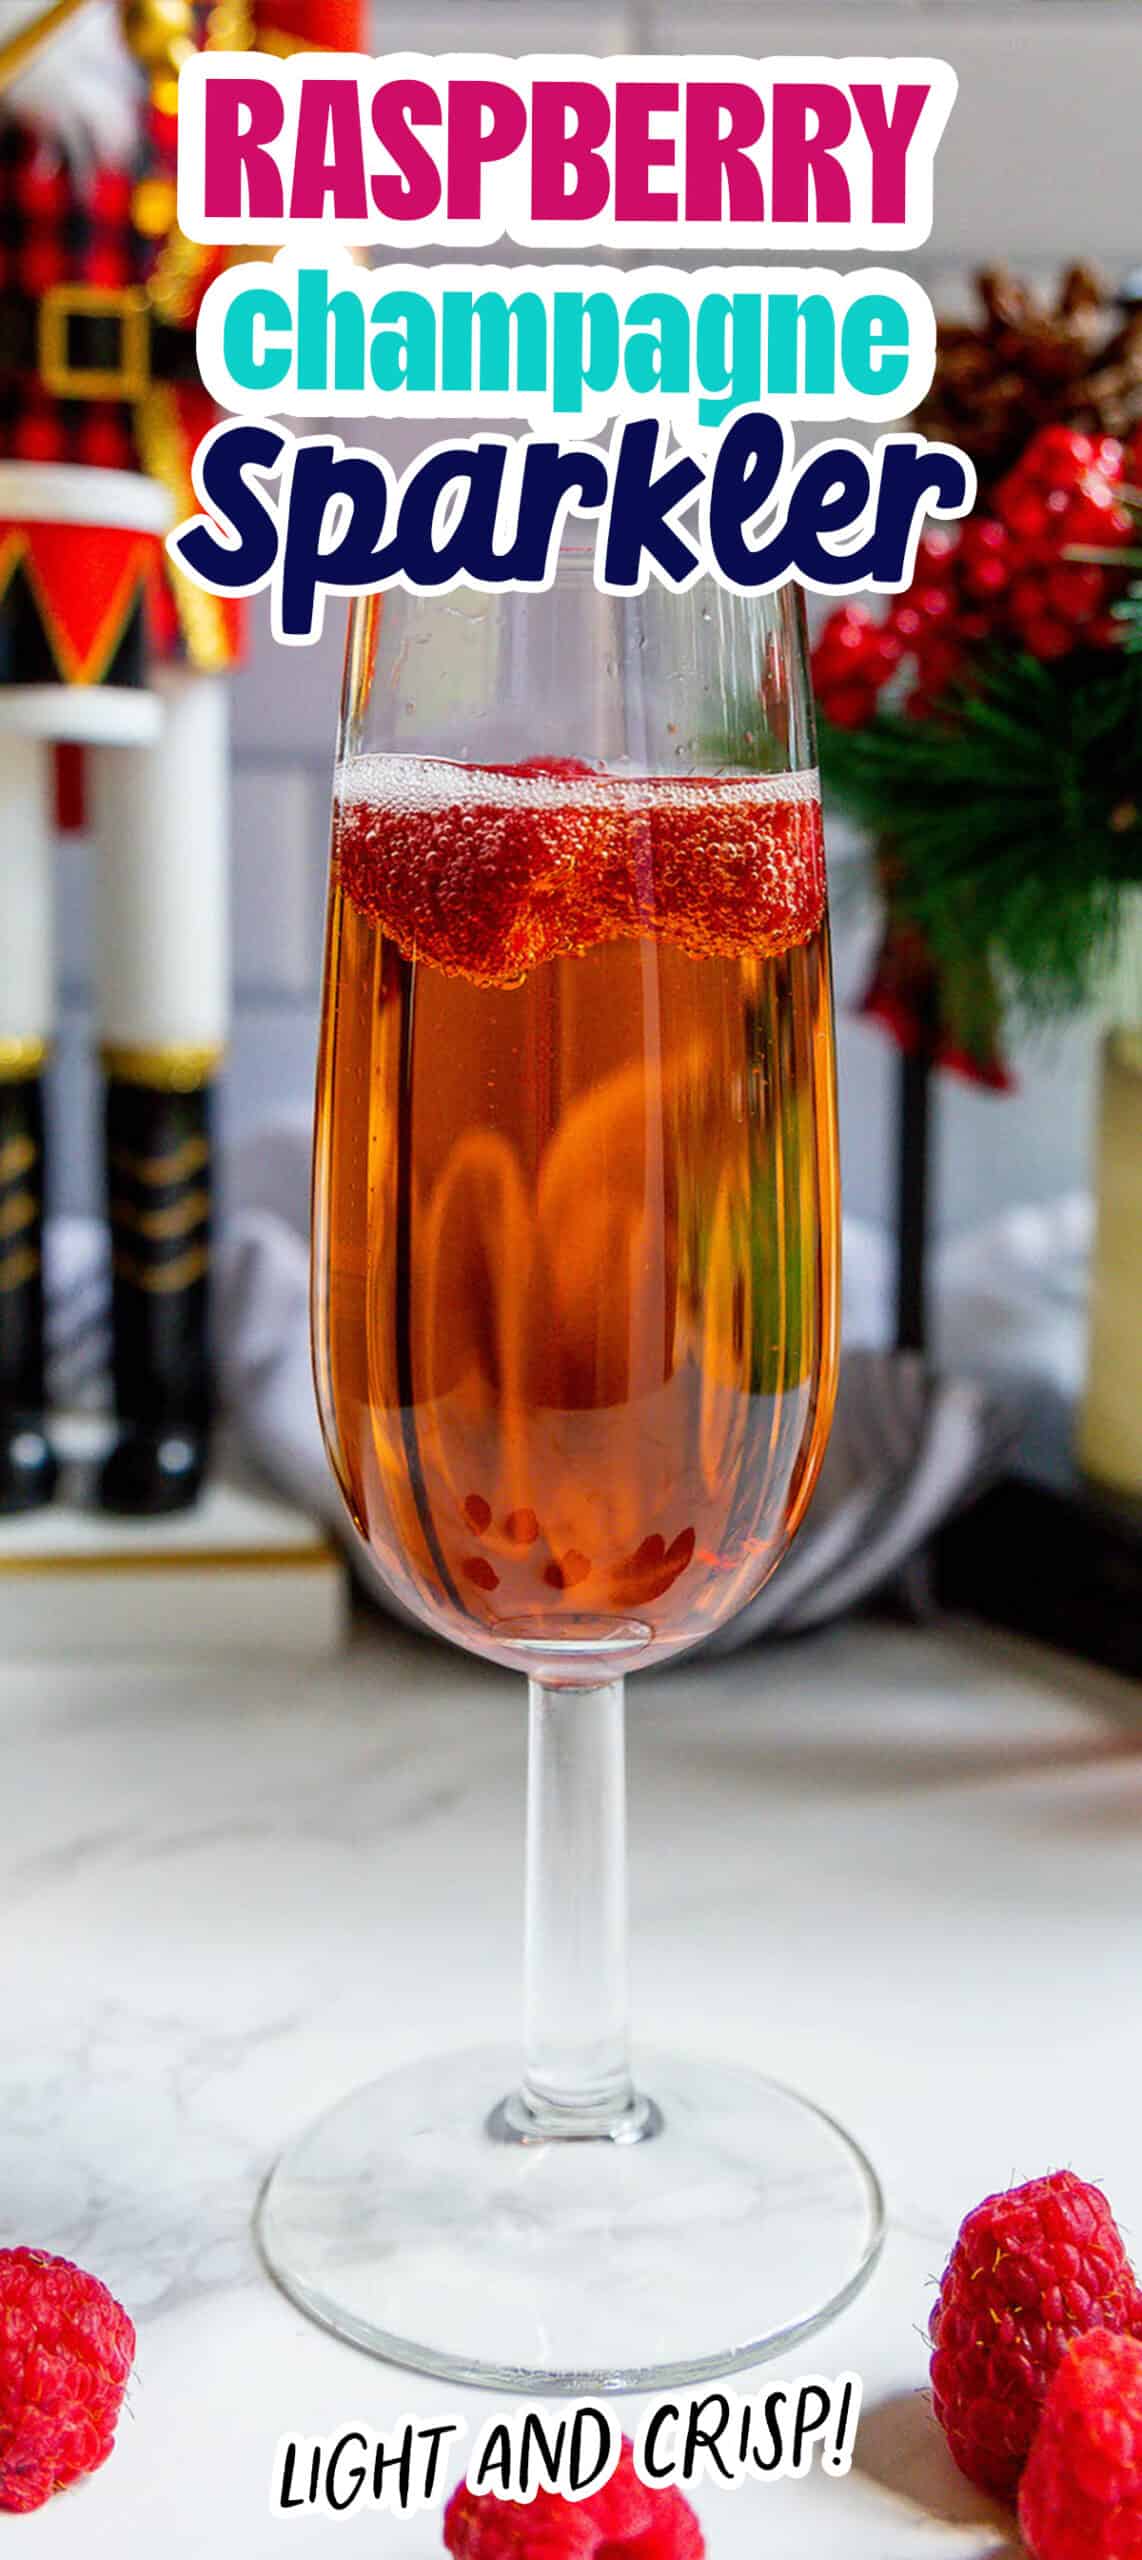 Raspberry champagne sparkler: This drink is light and crisp, perfect for a refreshing summer sip.